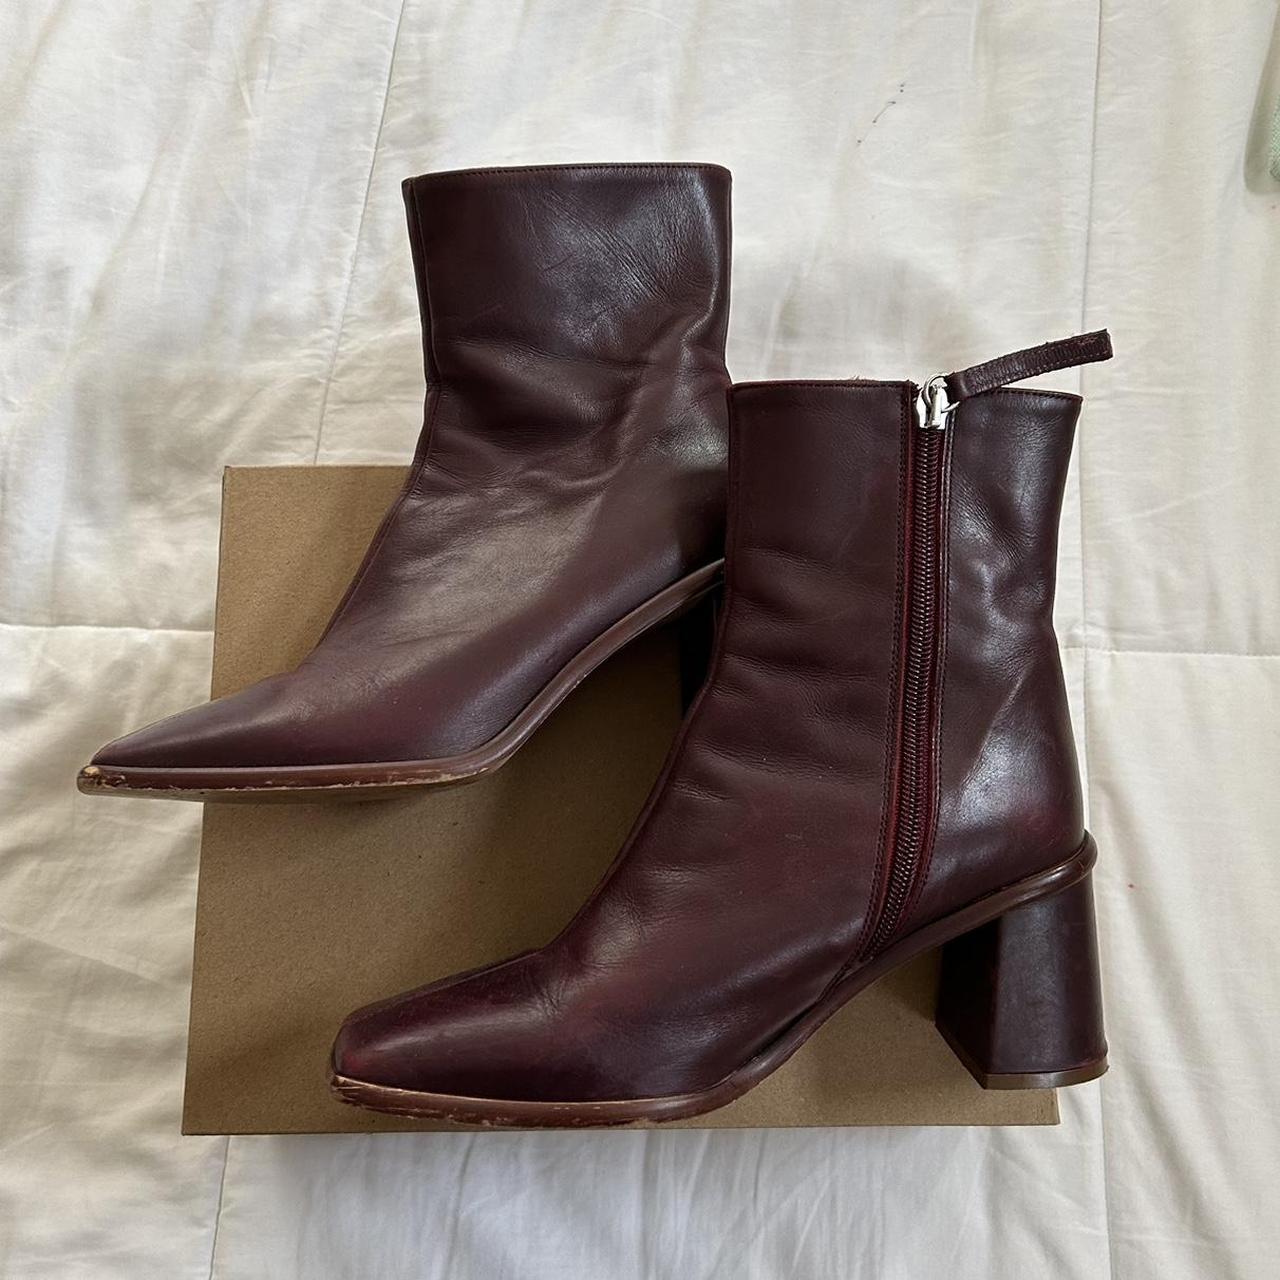 Alohas burgundy boots! Comfortable and the perfect... - Depop